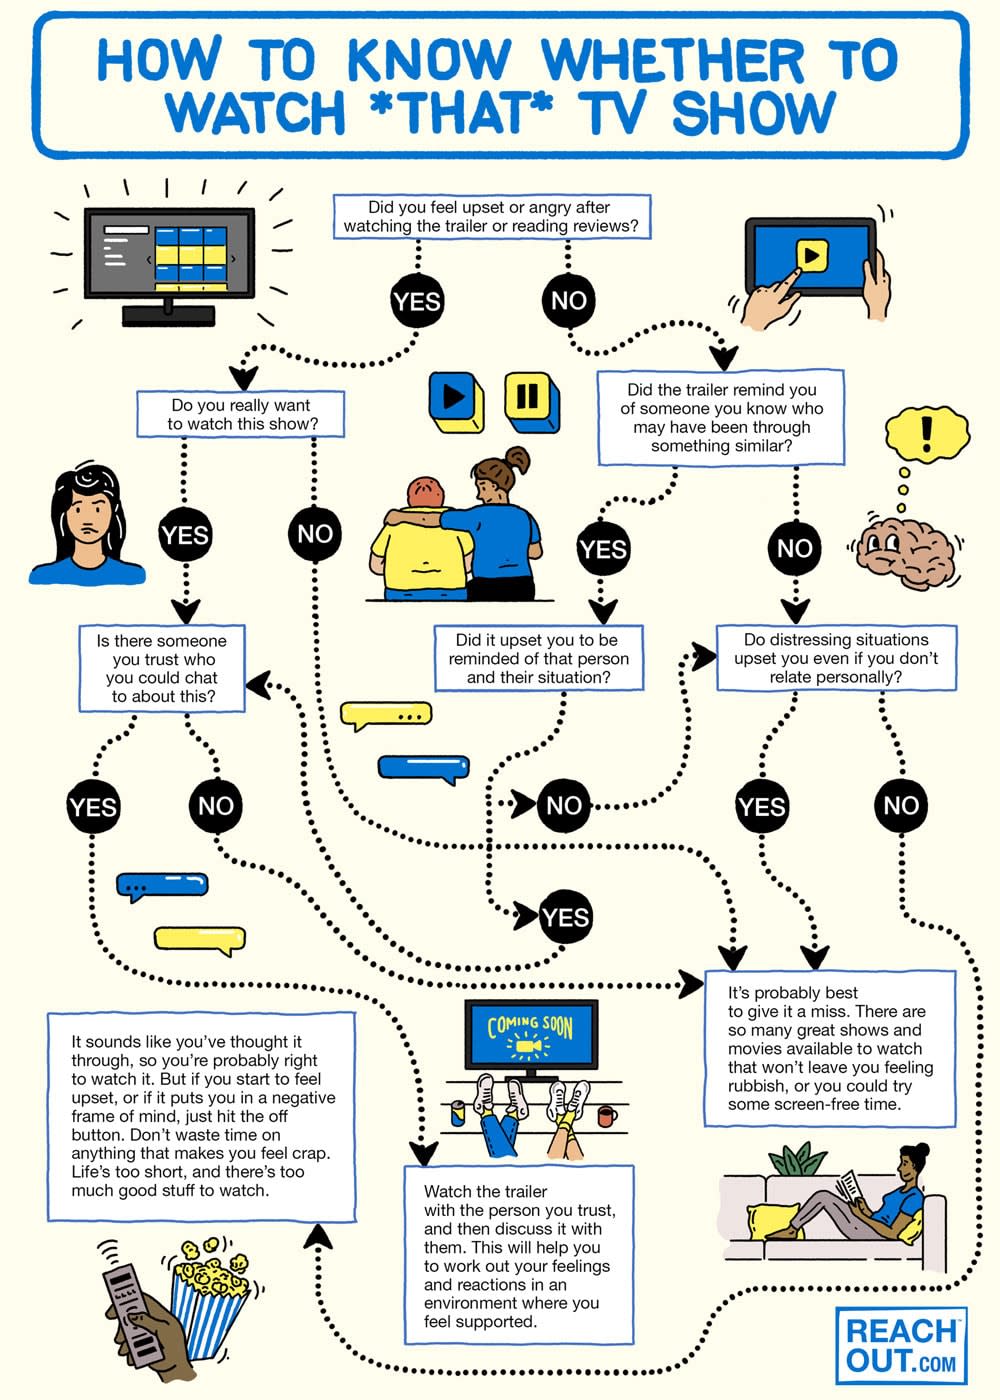 how to know whether to watch that tv show graphic decision tree